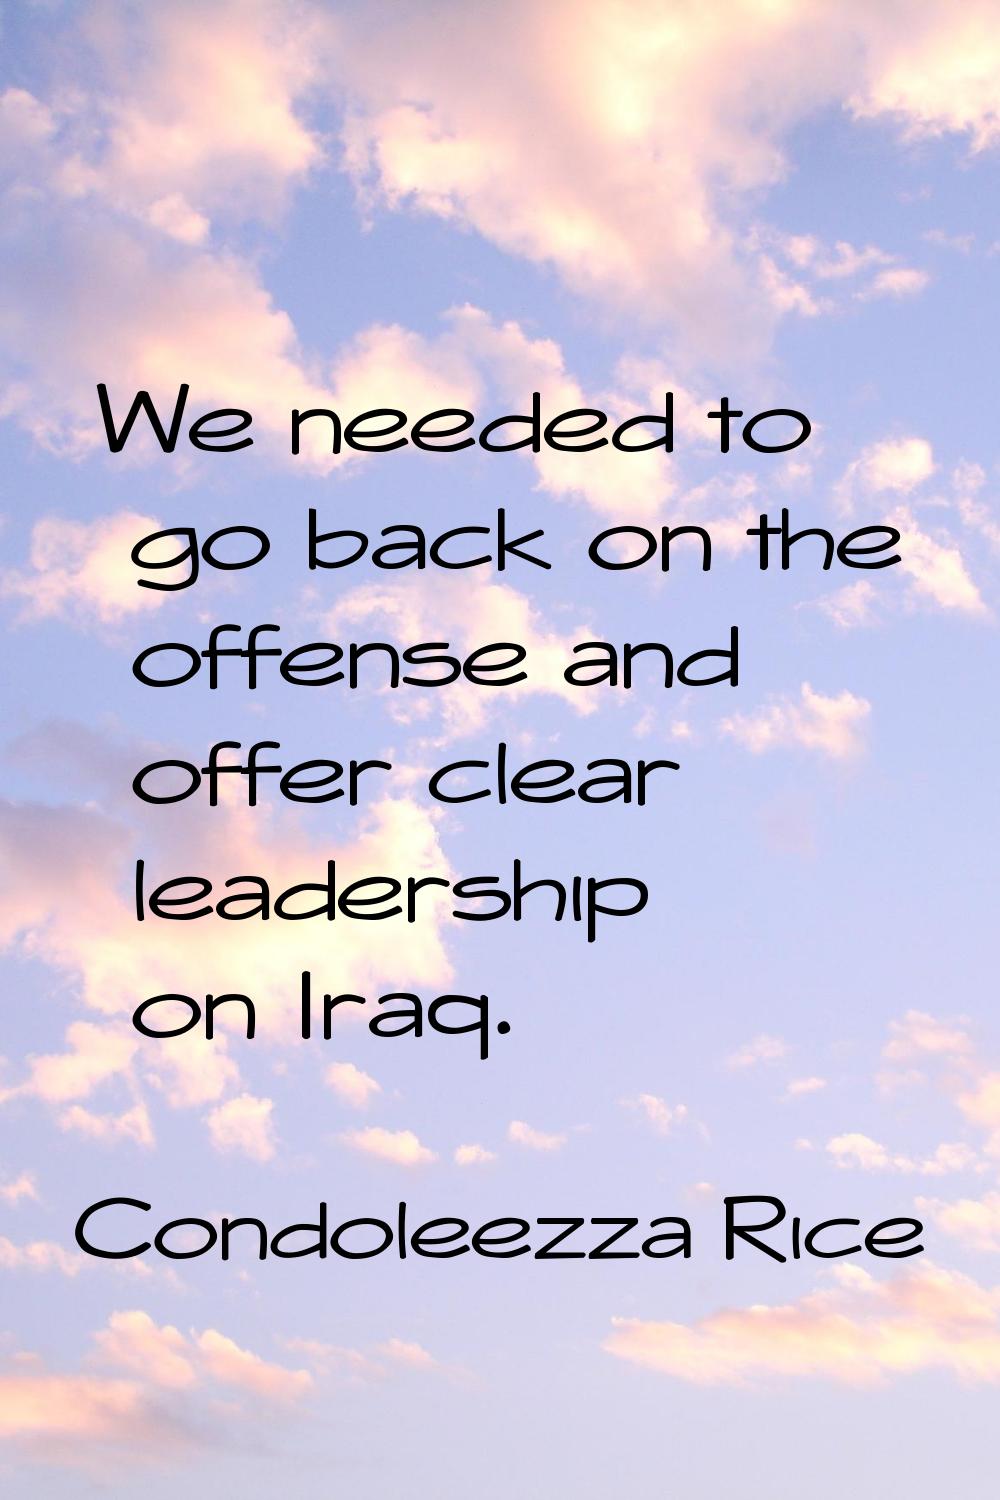 We needed to go back on the offense and offer clear leadership on Iraq.